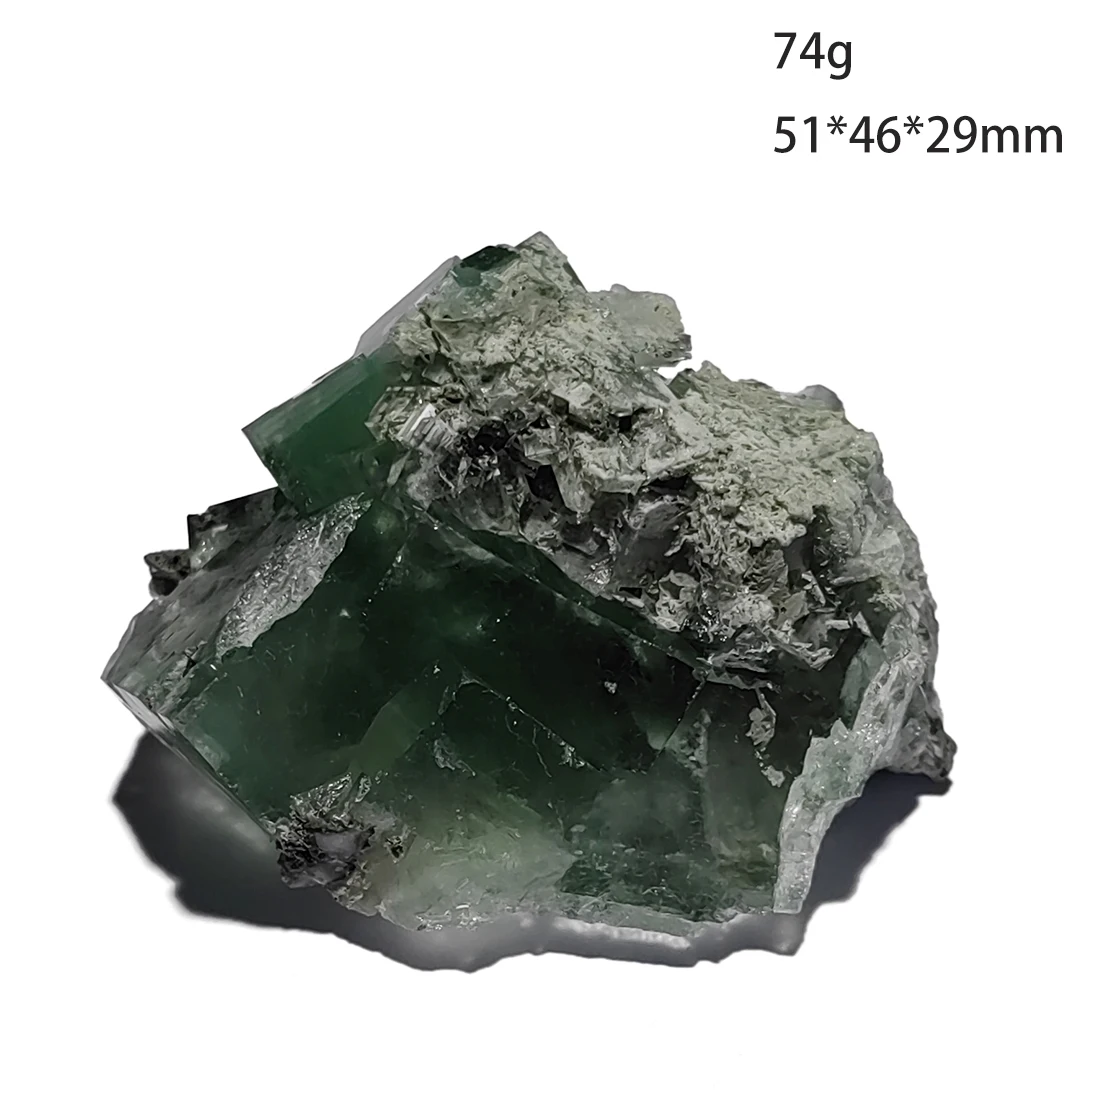 

C3-6L 100% Natural Green Fluorite Mineral Crystal Specimen Xianghualing Mine Hunan Province China